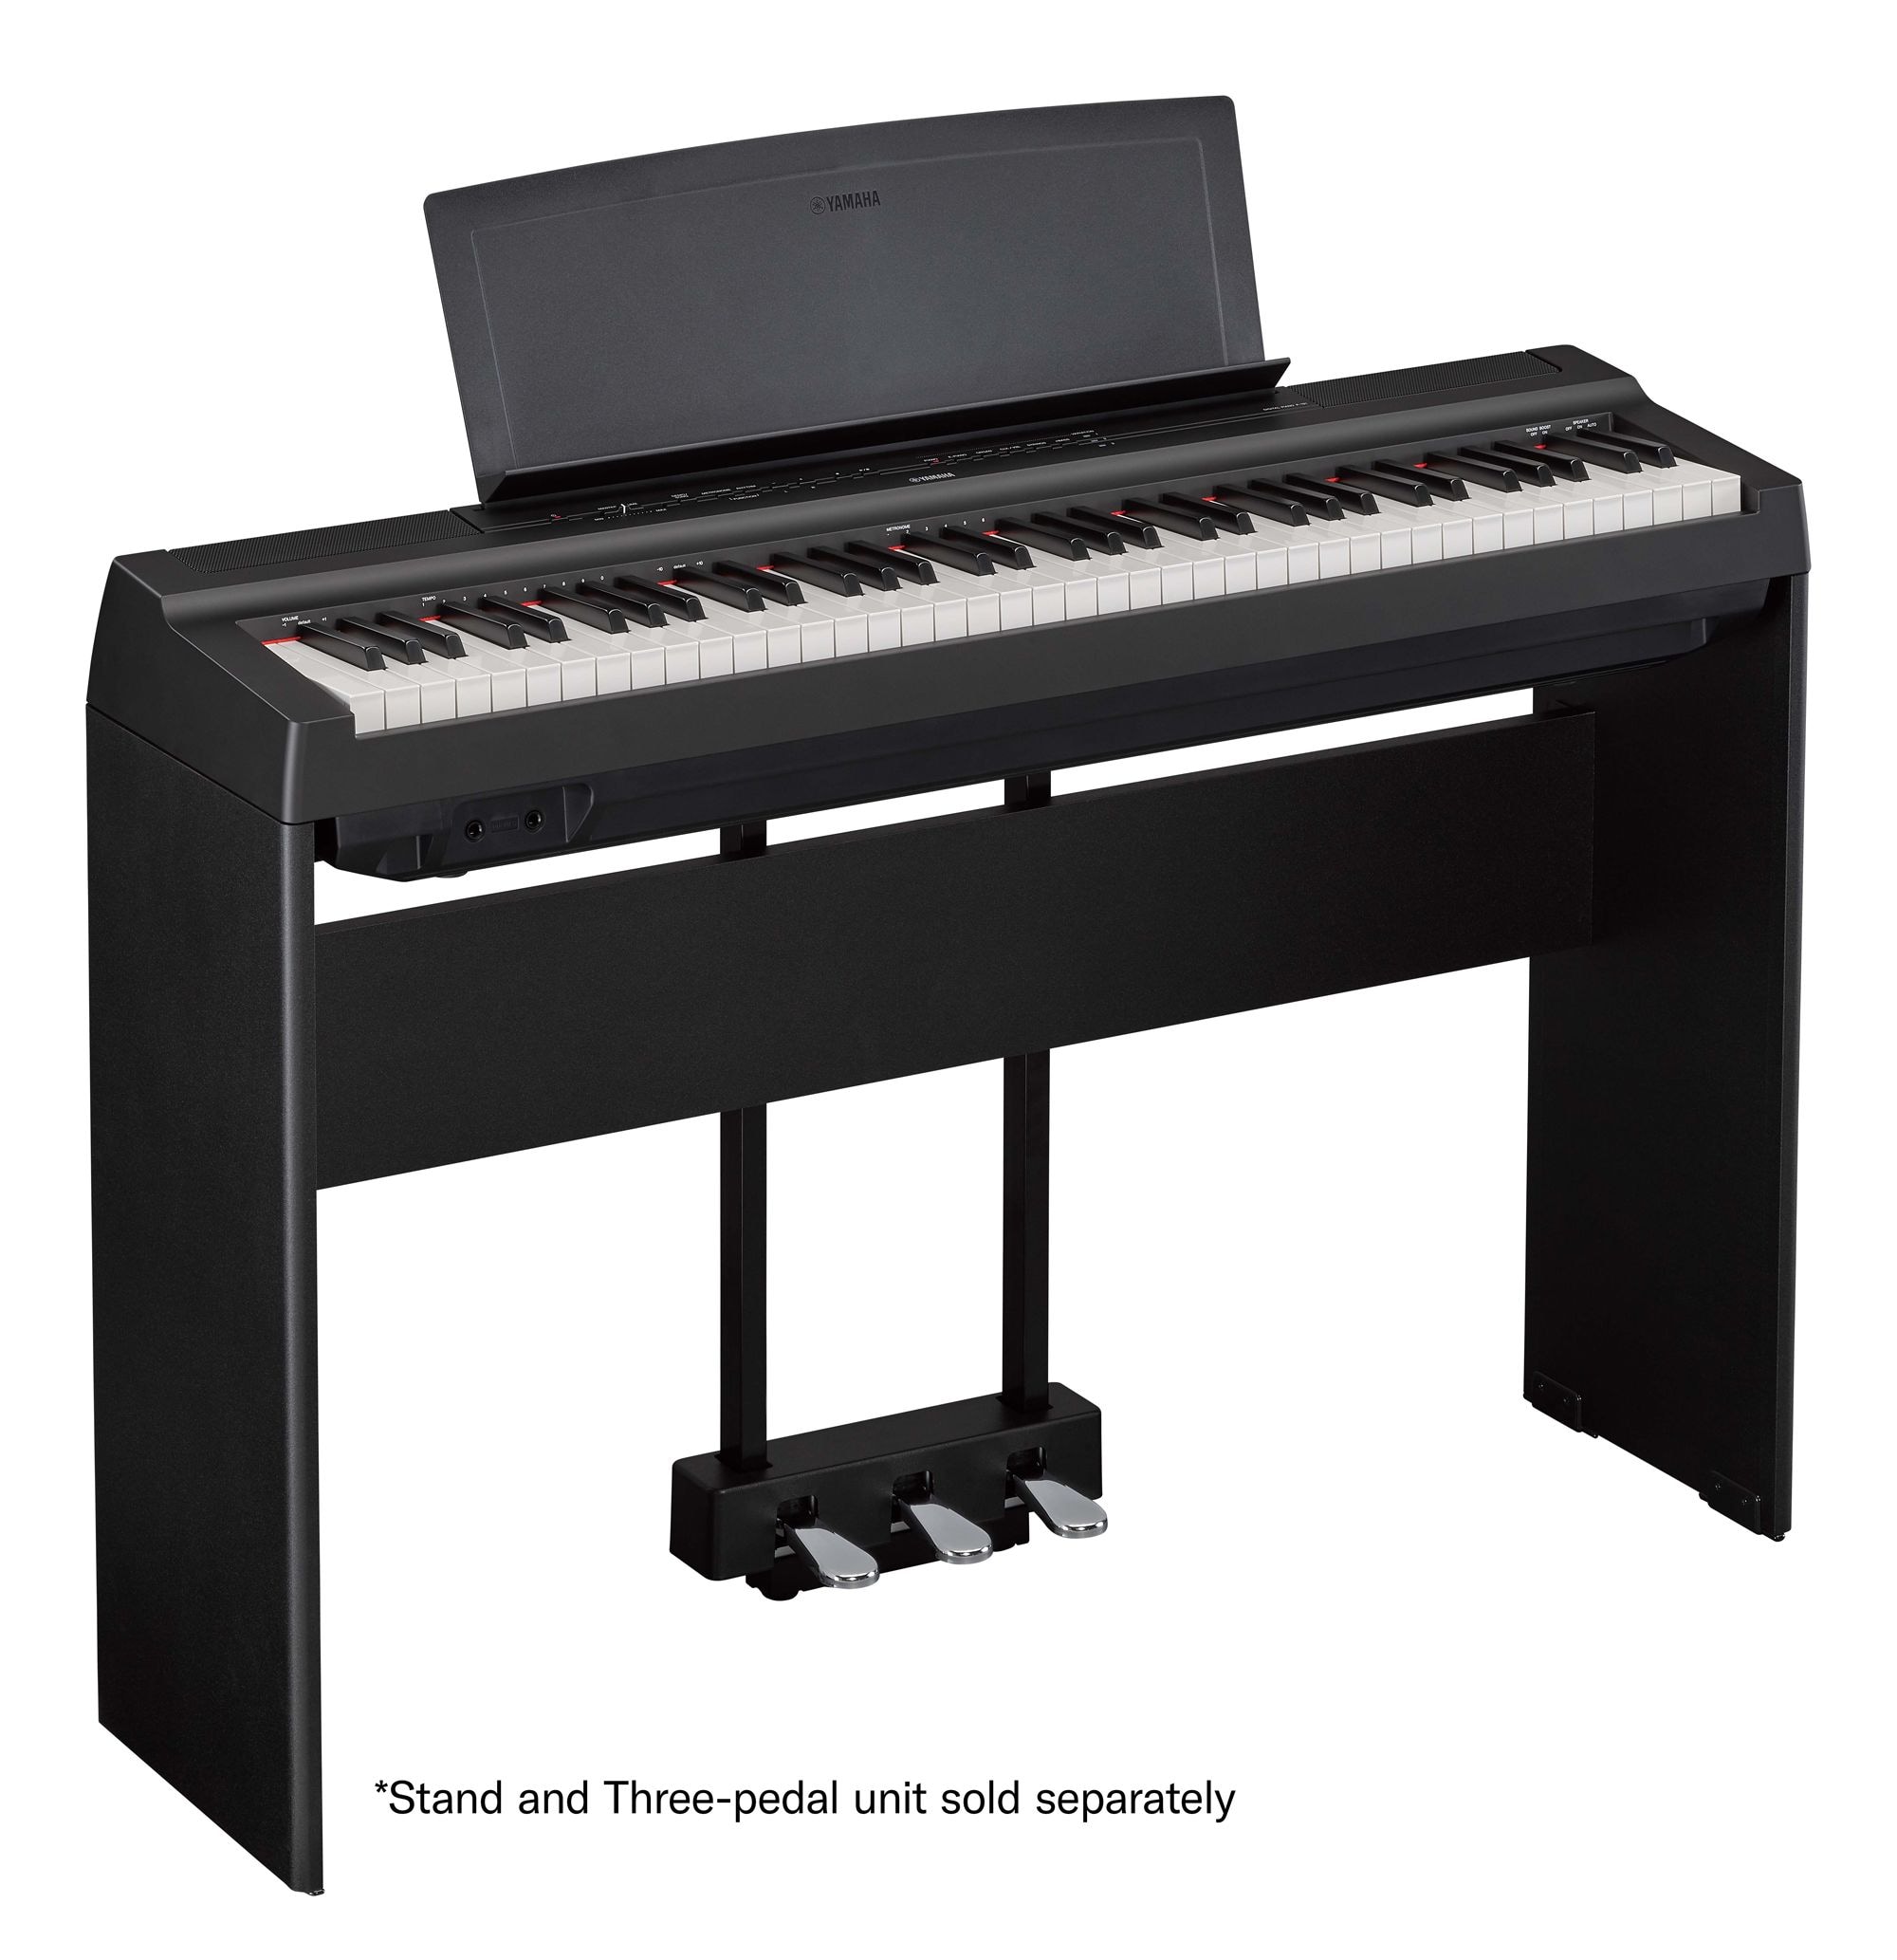 P-121 - Overview - Portables - Pianos - Musical Instruments